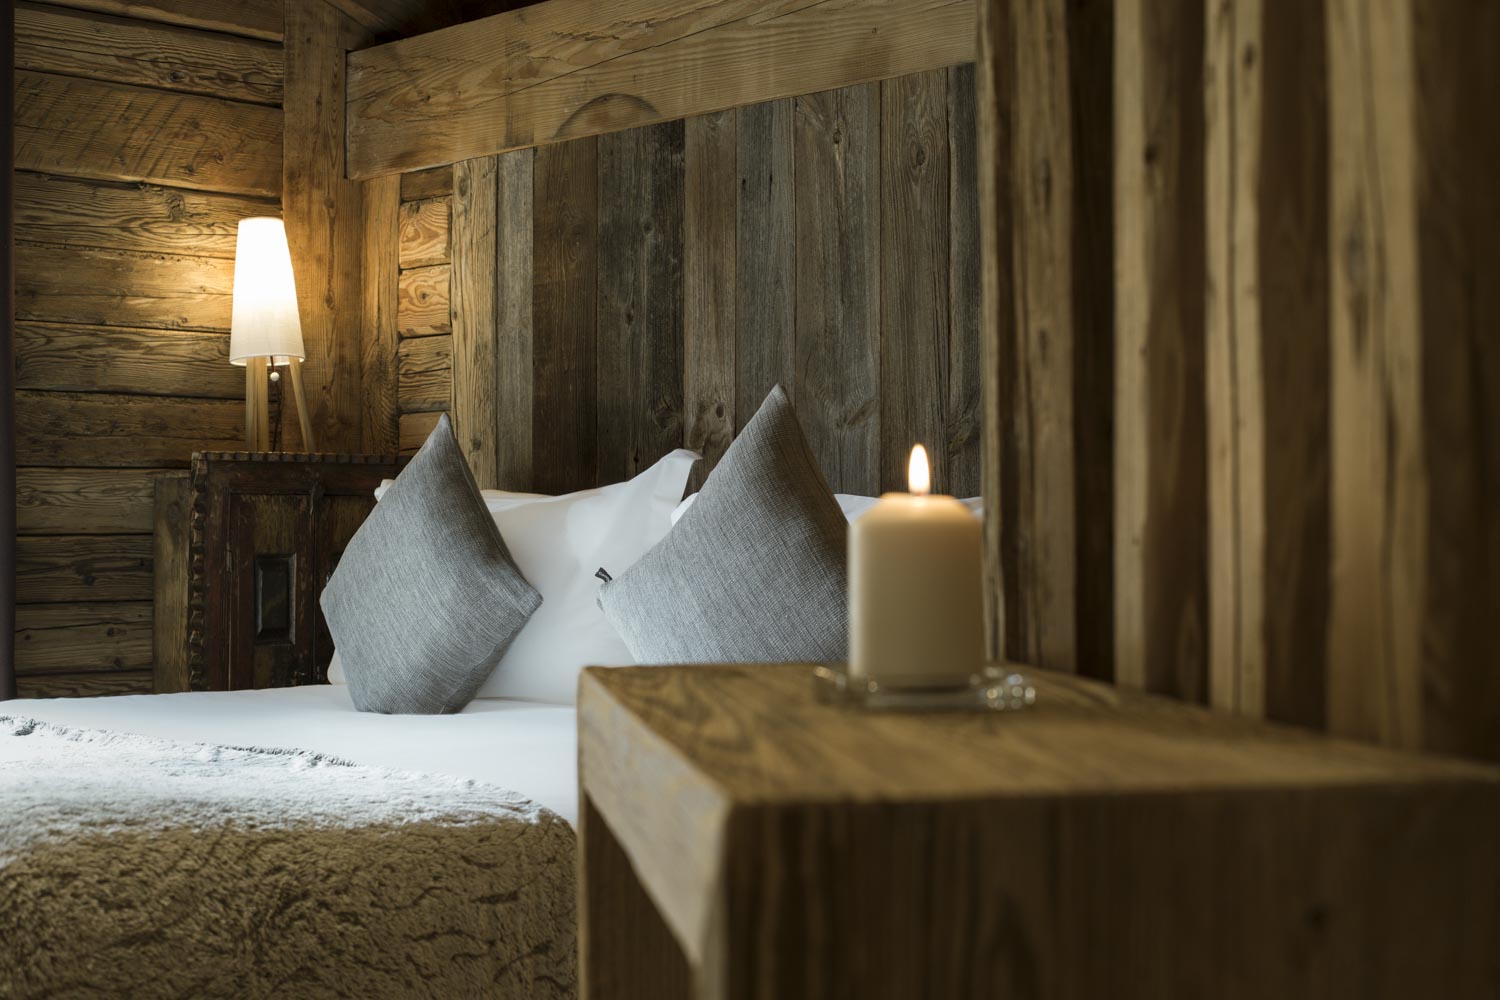 Chalet Kilco Penthouse - Luxury Chalet - HipHideouts - Bedroom - Bed - Candle - Val d'Isère